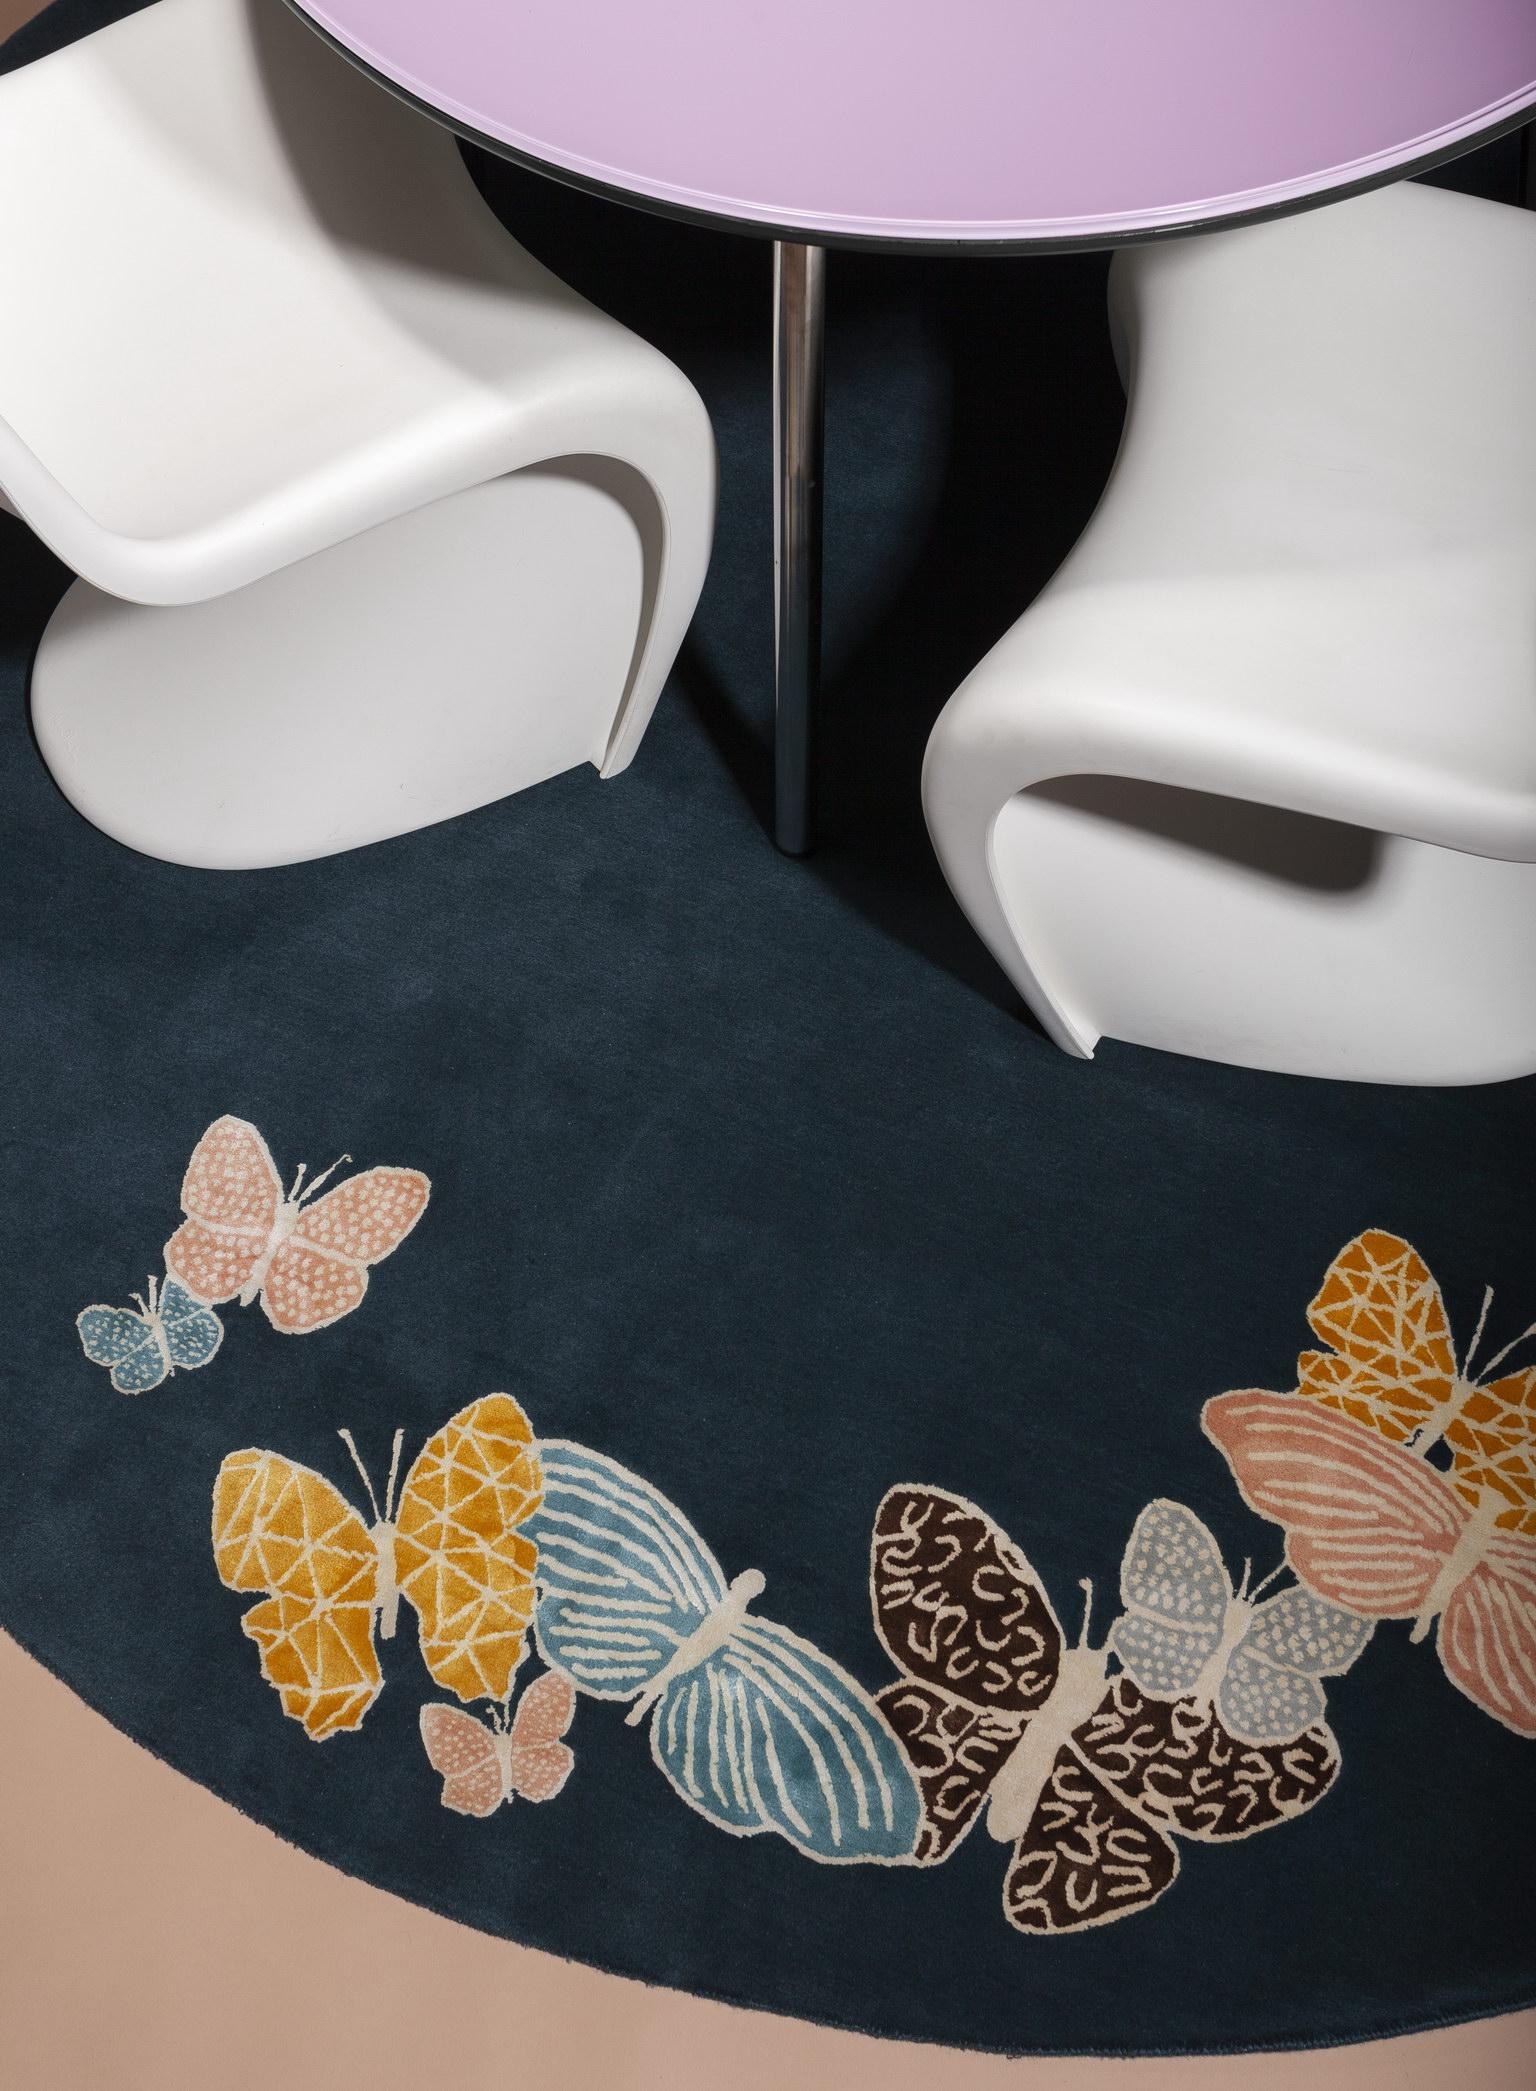 Sergio Mannino Studio's collection of rugs is expanded with new designs. (See storefront to look at other items).
Hand-drawn butterflies seem to come out of the floor. The background is wool, while the butterflies are made with a silk thread. Please